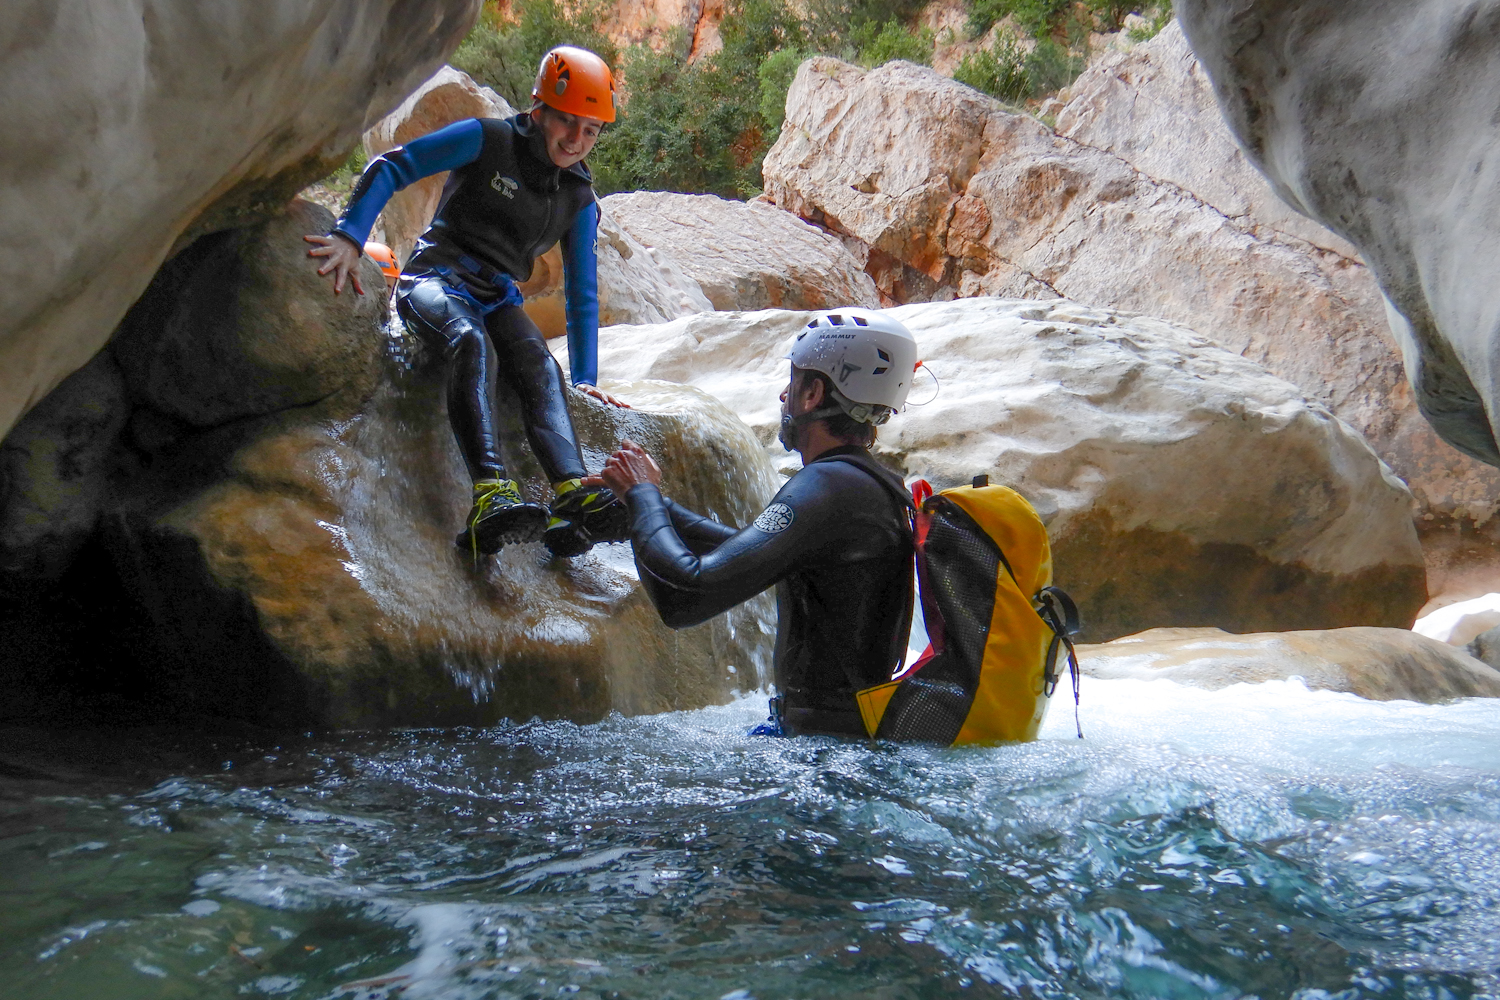 Offers of canyoning by the company Le Sens de l'Eau